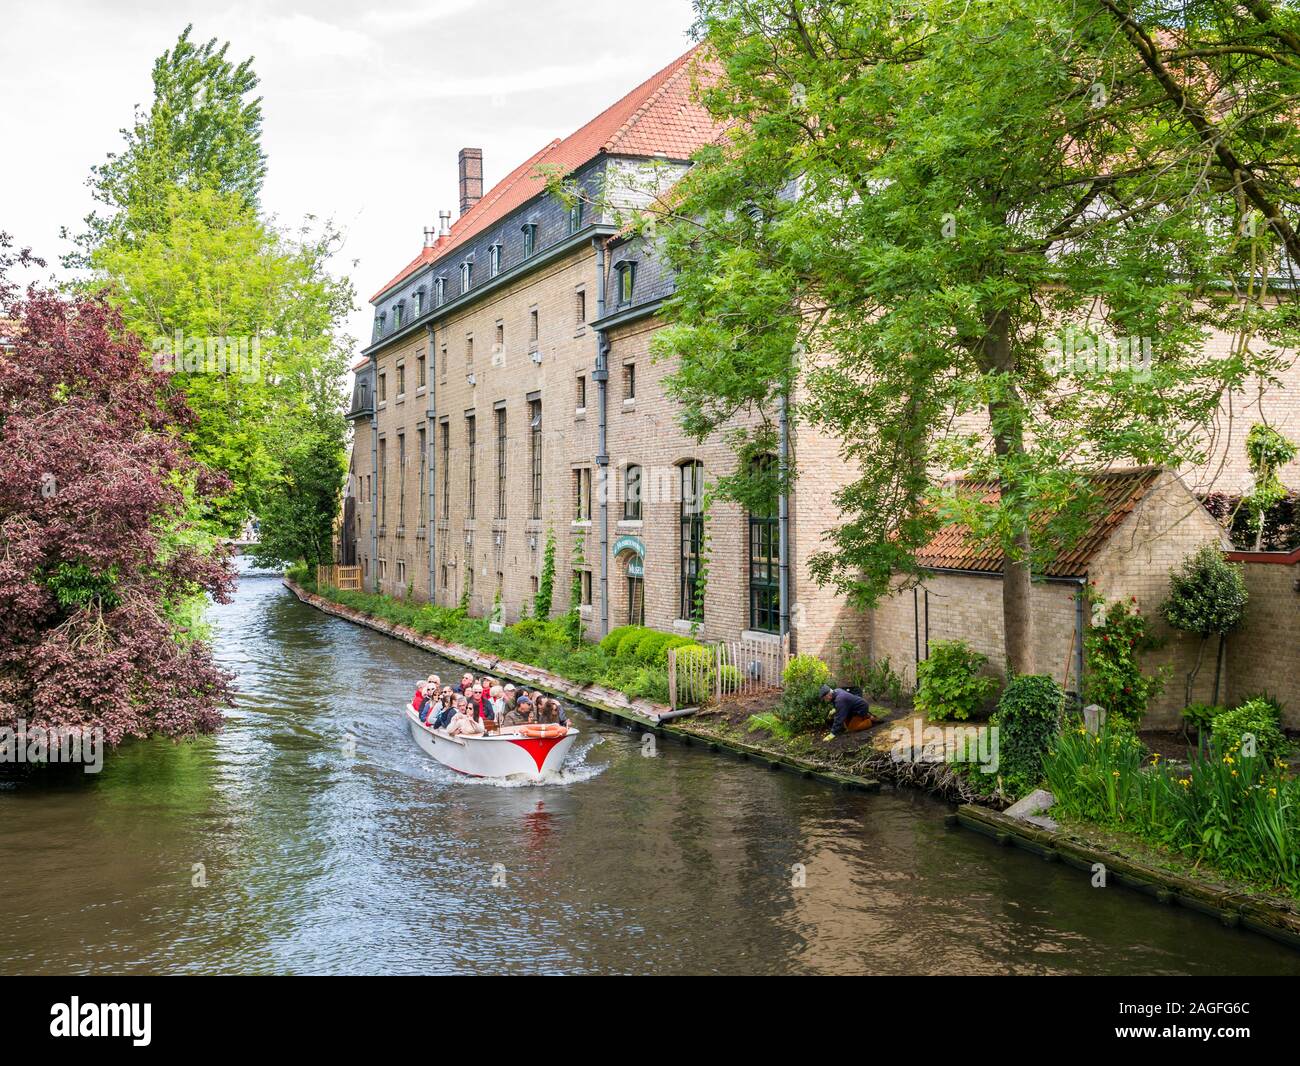 People on boat tour on Bakkersrei canal in old town of Bruges, Belgium Stock Photo